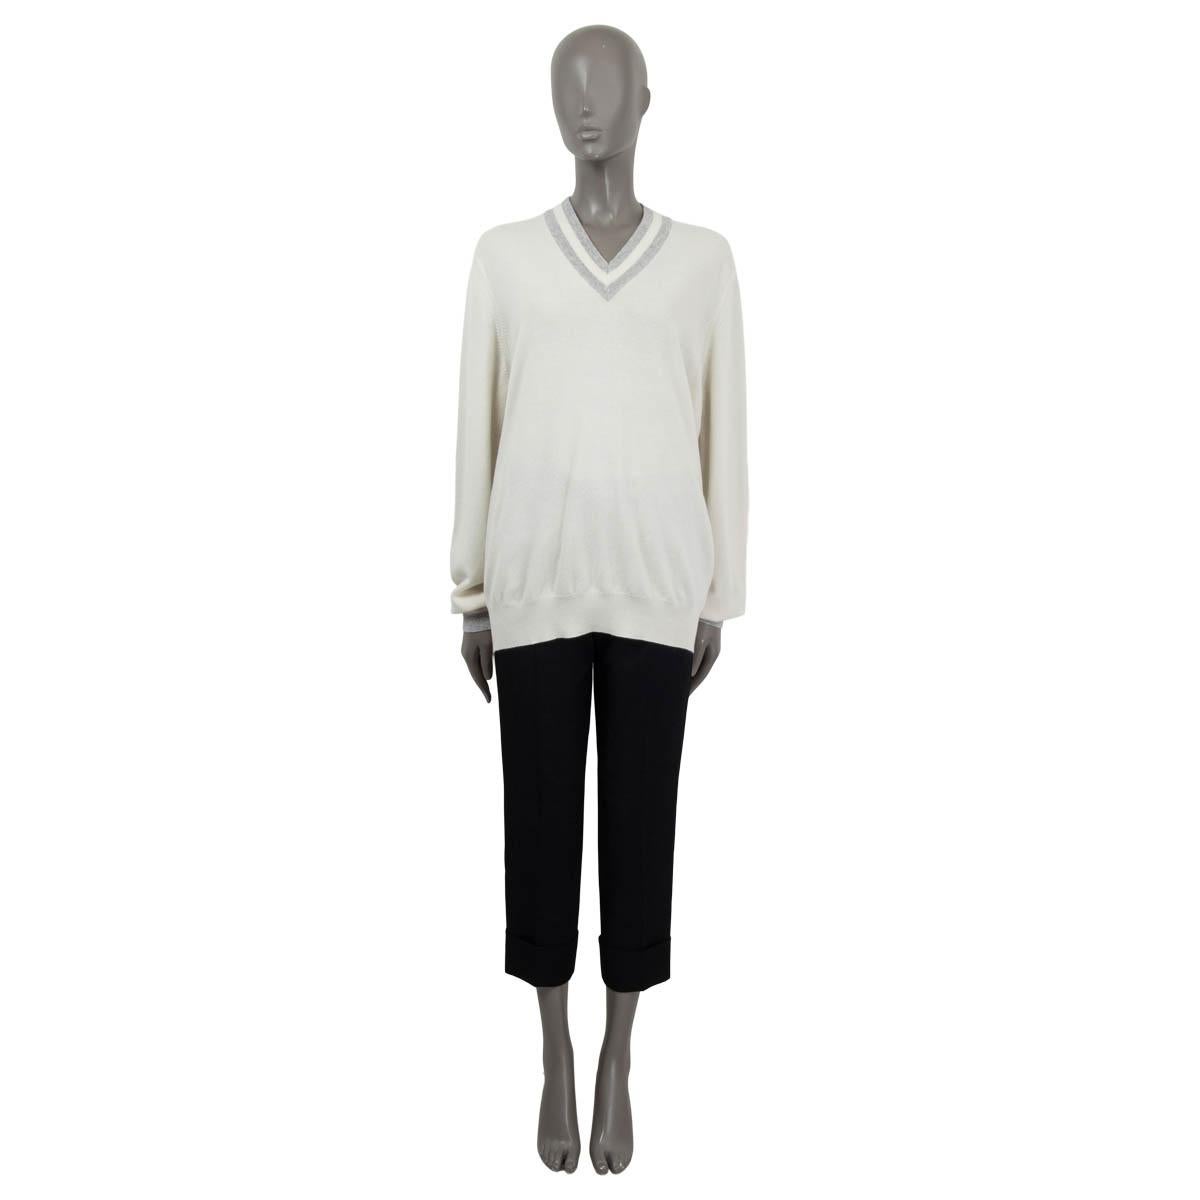 100% authentic Brunello Cucinelli long sweater in ivory and gray cashmere (100%). Features long sleeves, a striped v-neck and striped cuffs. Unlined. Has been worn and is in excellent condition.

Measurements
Tag Size	L
Size	L
Shoulder Width	48cm